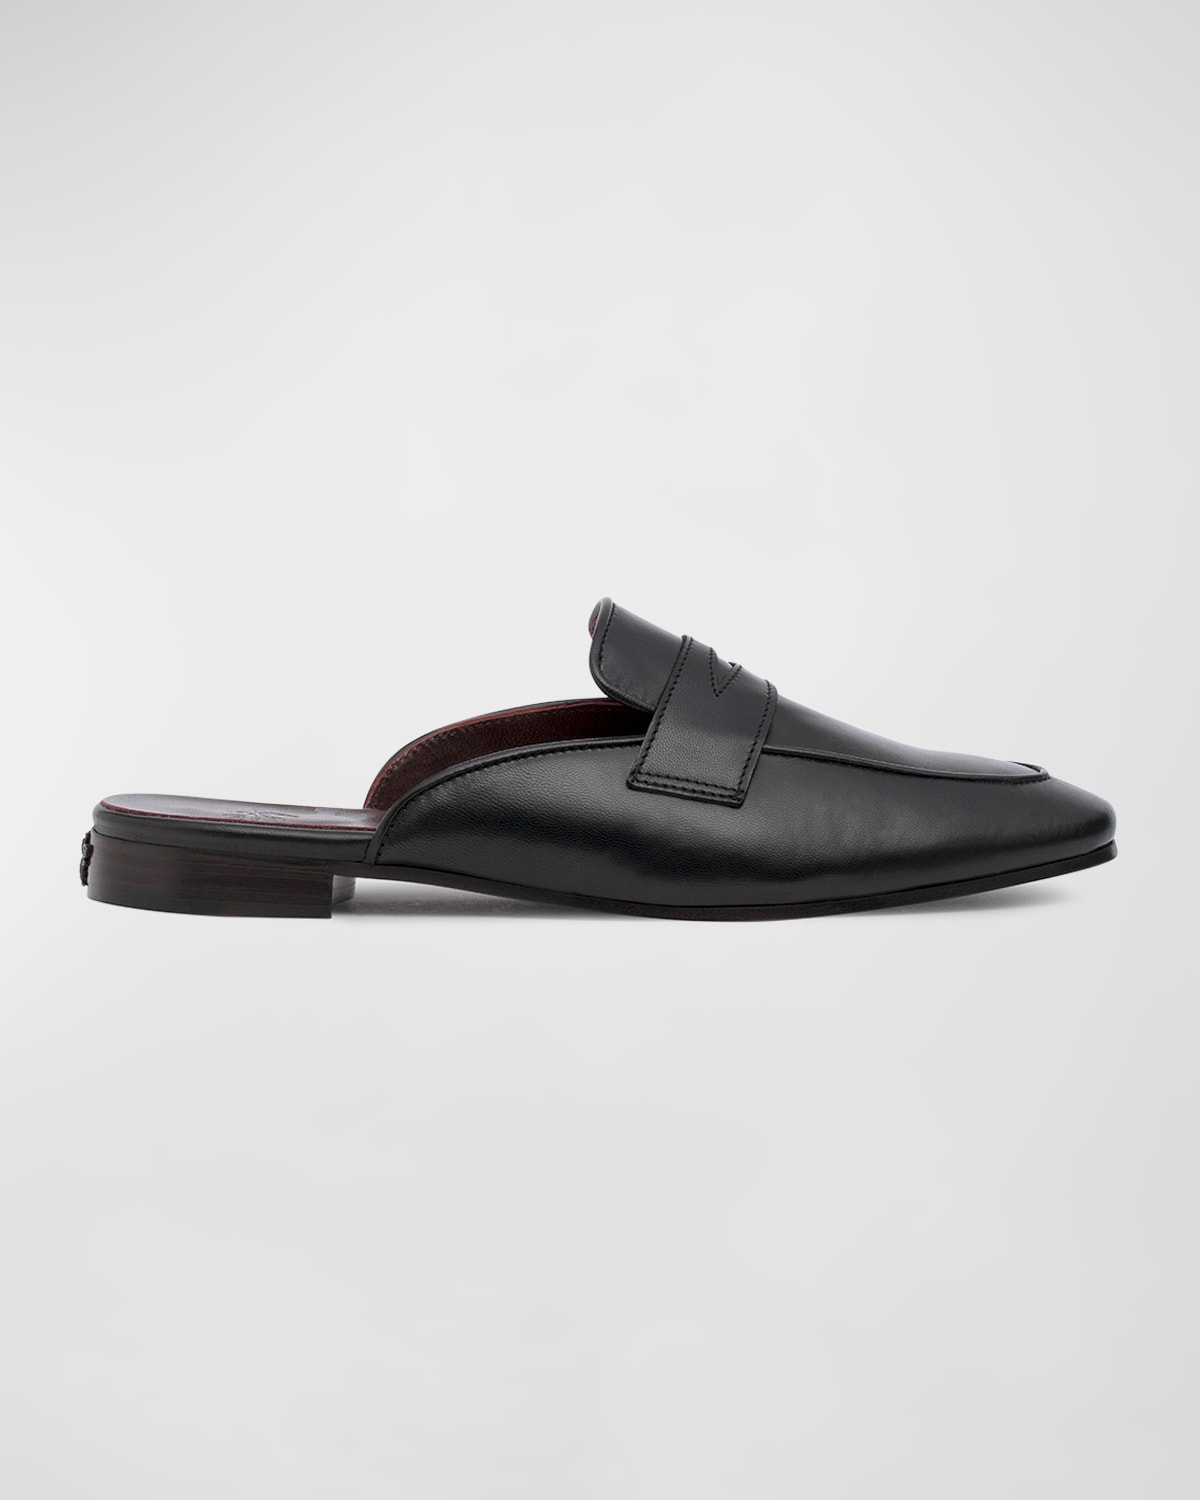 Bougeotte Leather Penny Loafer Mules